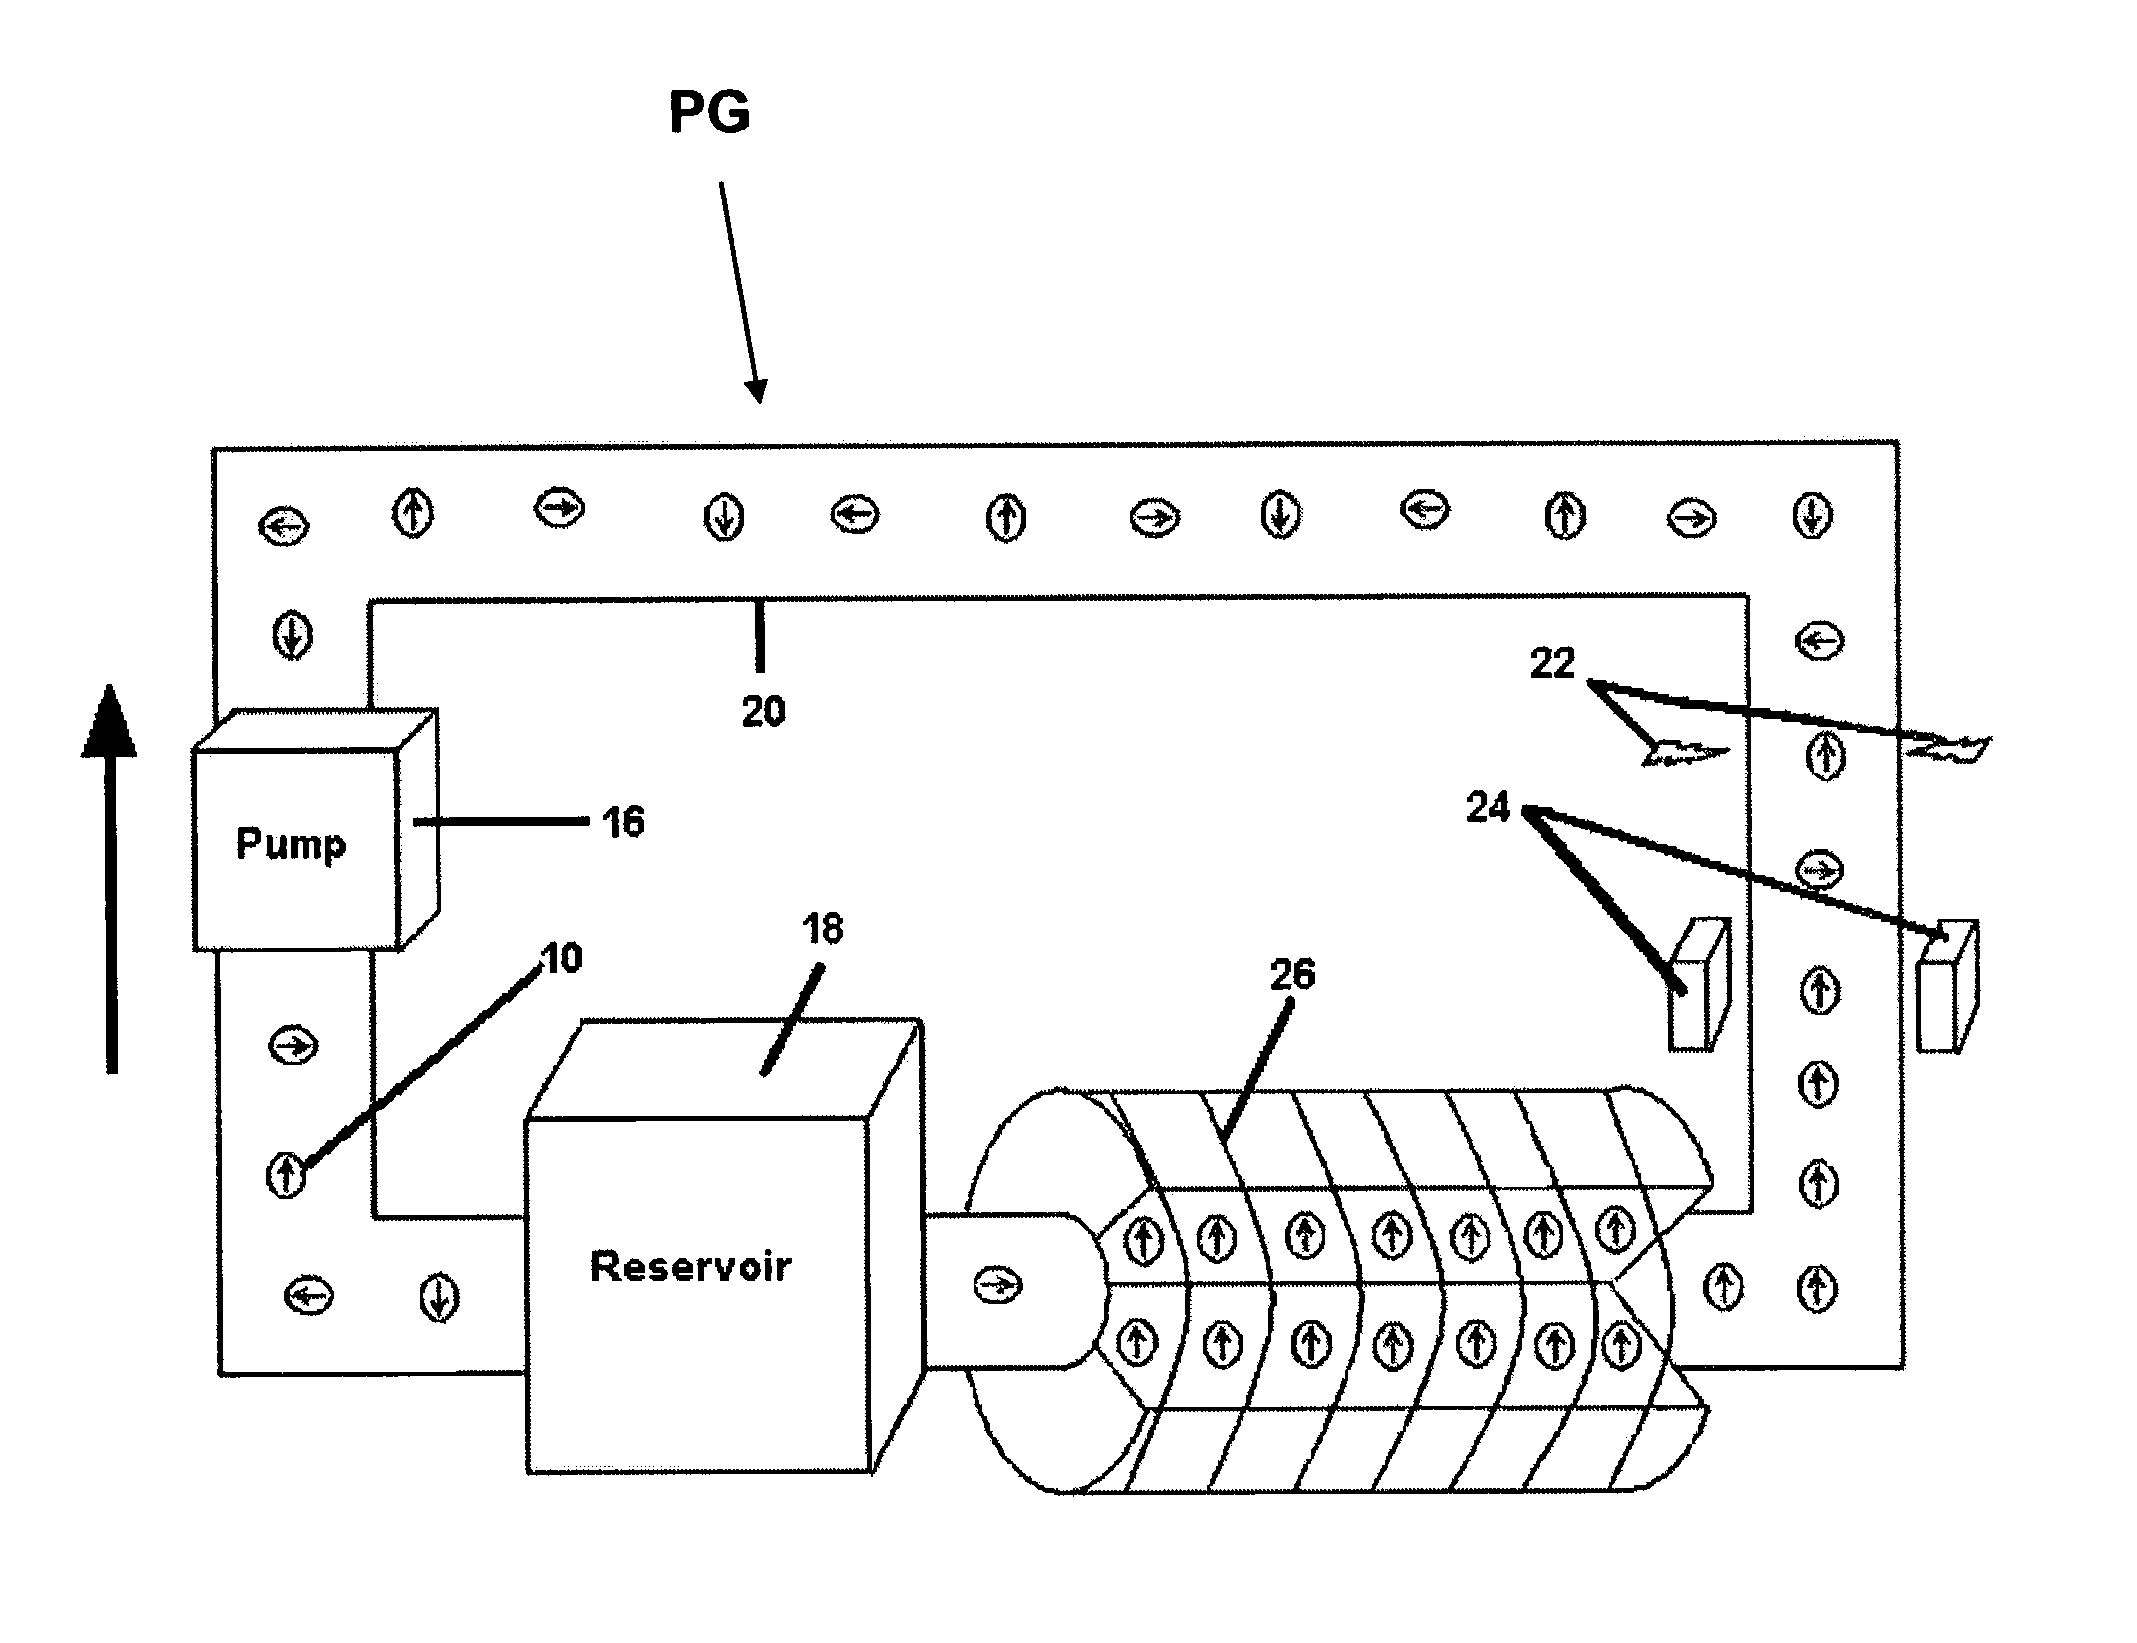 Magnetic fluid power generator device and method for generating power